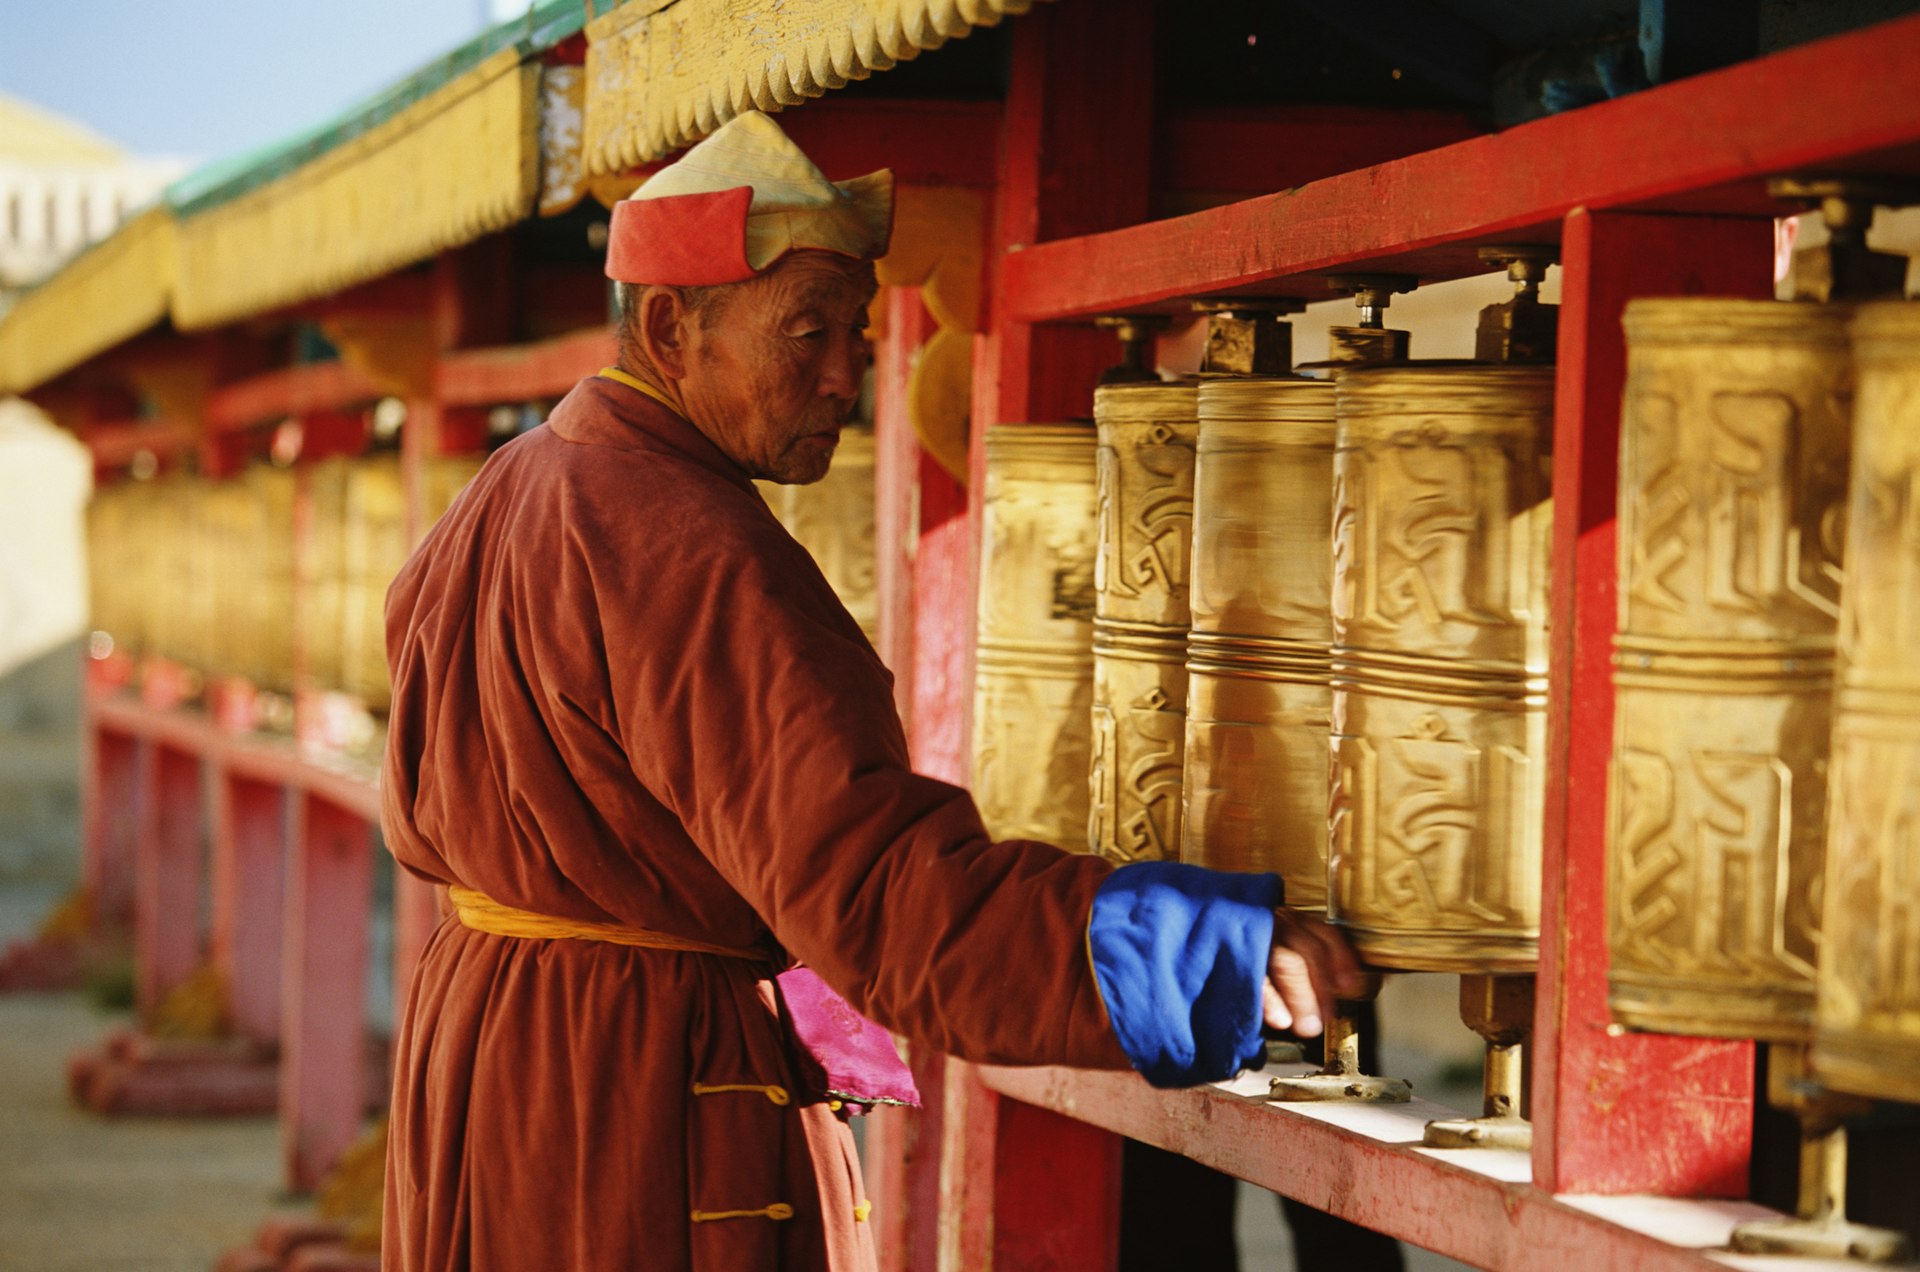 A monk turning prayer wheels in a monastery in Mongolia